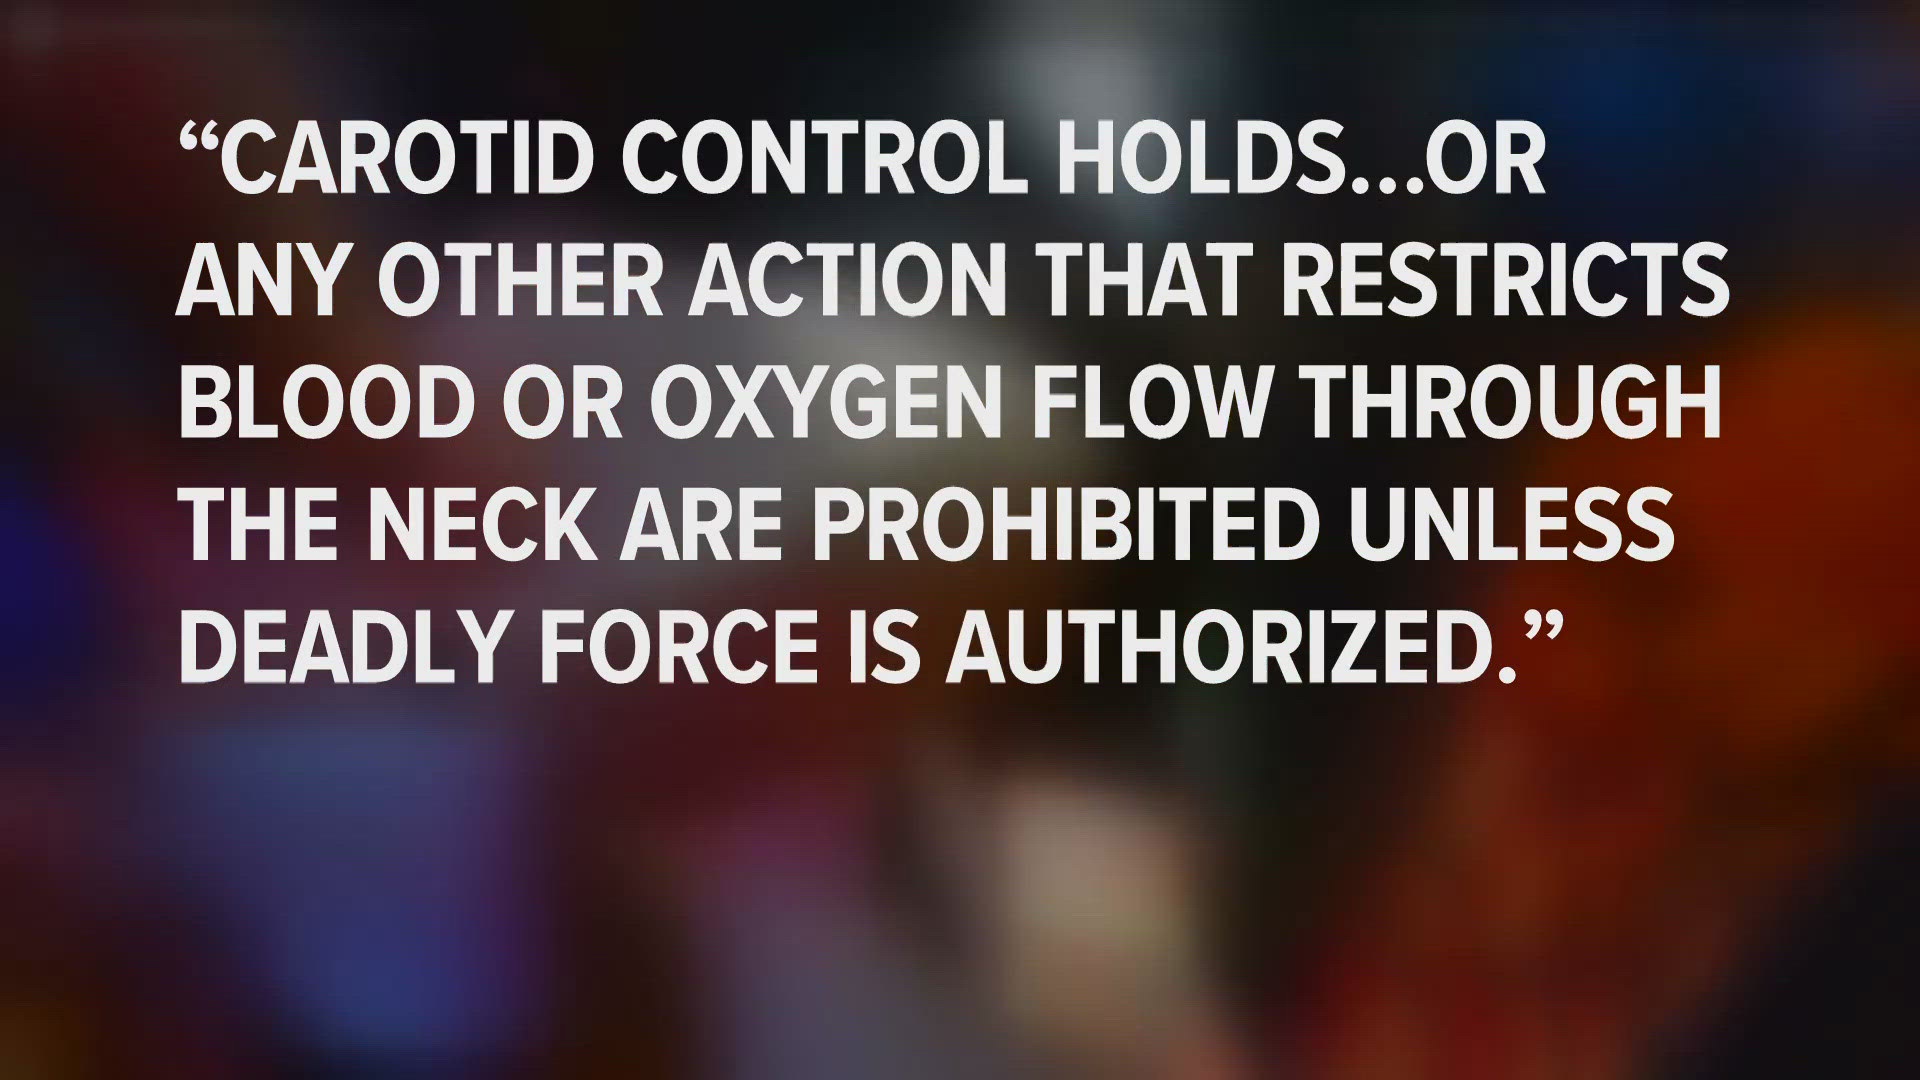 The text doesn't mention kneeling, but does say, 'Carotid control holds ... or any other action that restricts blood or oxygen flow through the neck are prohibited.'